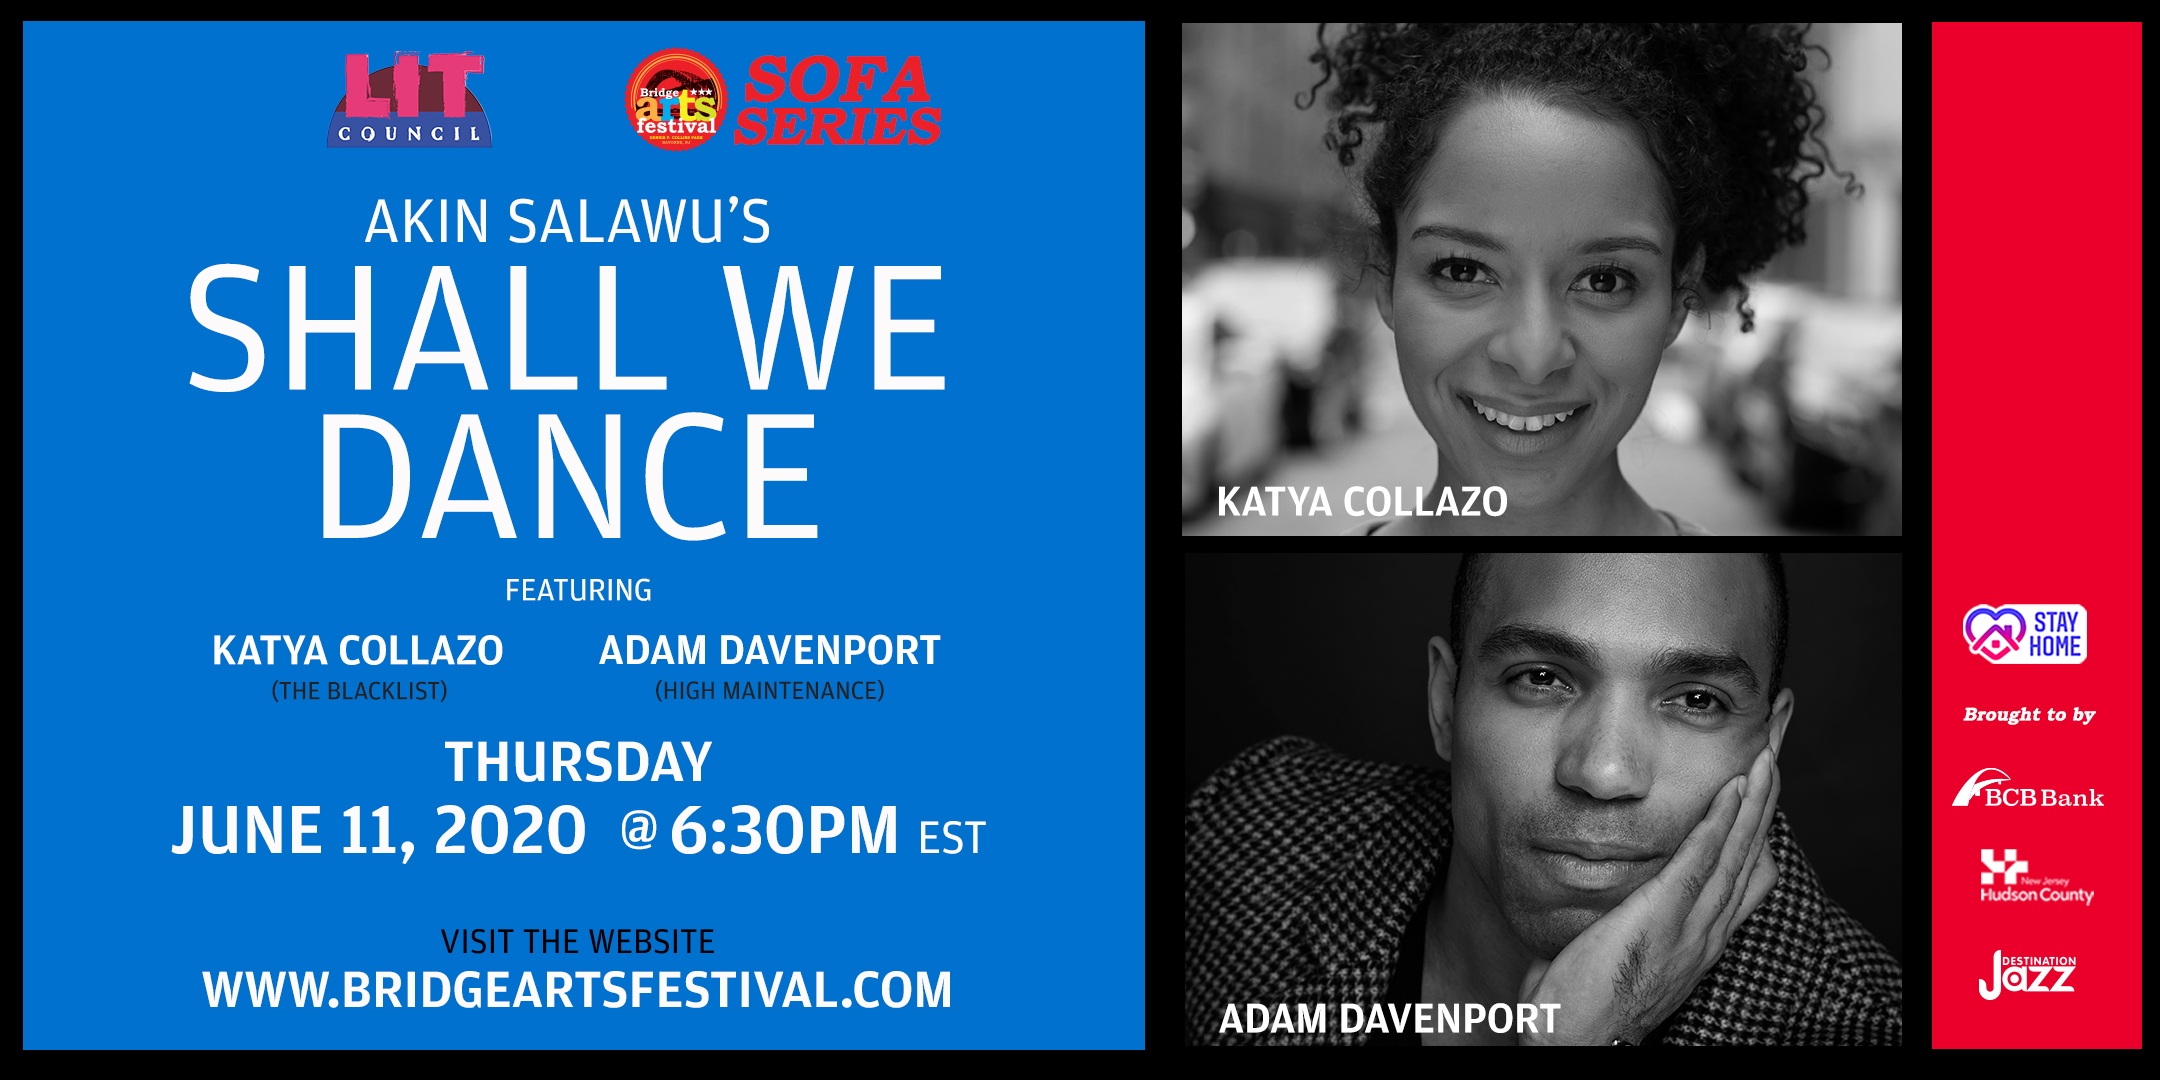 Flyer for Akin Salawu's Shall We Dance featuring Katya Collazo and Adam Davenport; Thursday June 11, 2020 @ 6:30 Pm EST; Headshots of the two lead actors